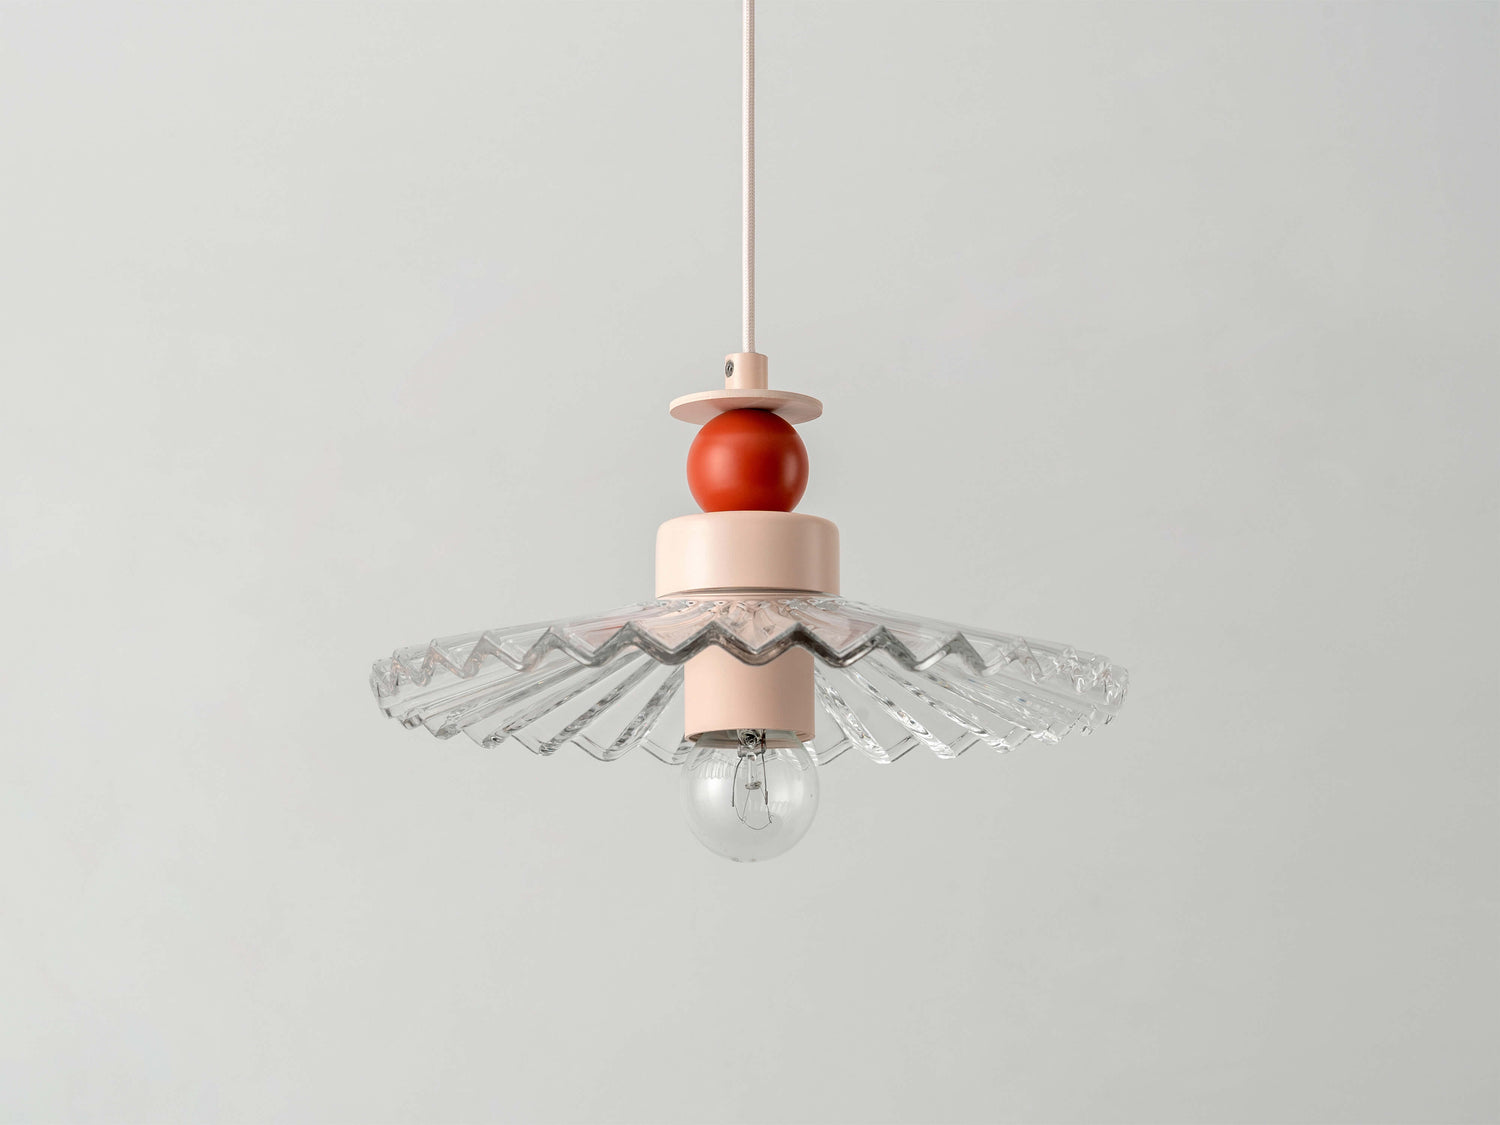 A fluted, ribbed glass shade is stacked with burnt orange and pale pink painted metal disk and ball elements, hanging from a ceiling pendant.